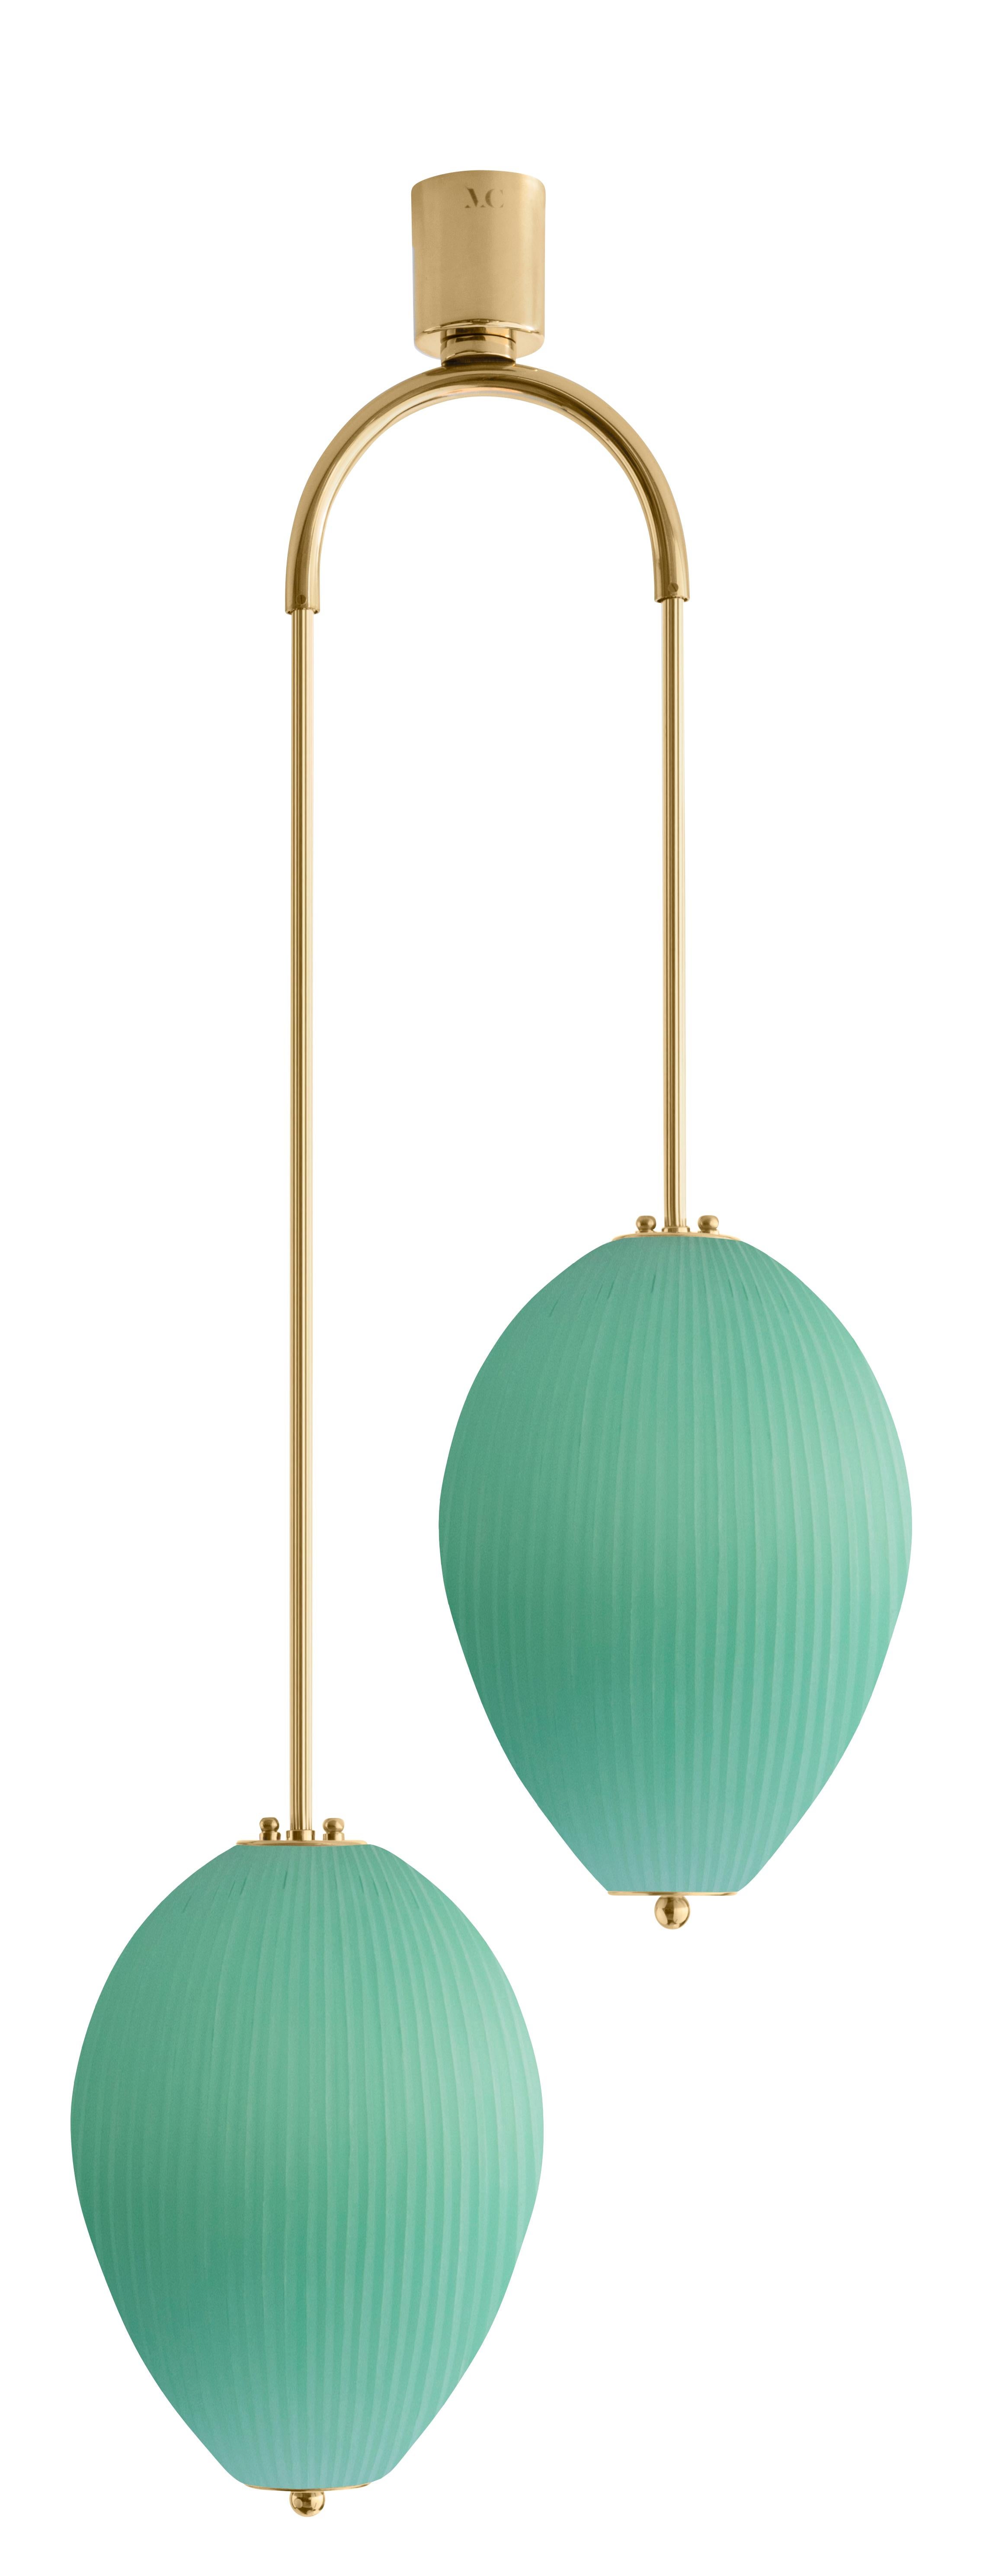 Double chandelier China 10 by Magic Circus Editions
Dimensions: H 121.5 x W 44.3 x D 25.2 cm
Materials: Brass, mouth blown glass sculpted with a diamond saw
Colour: jade green

Available finishes: Brass, nickel
Available colours: enamel soft